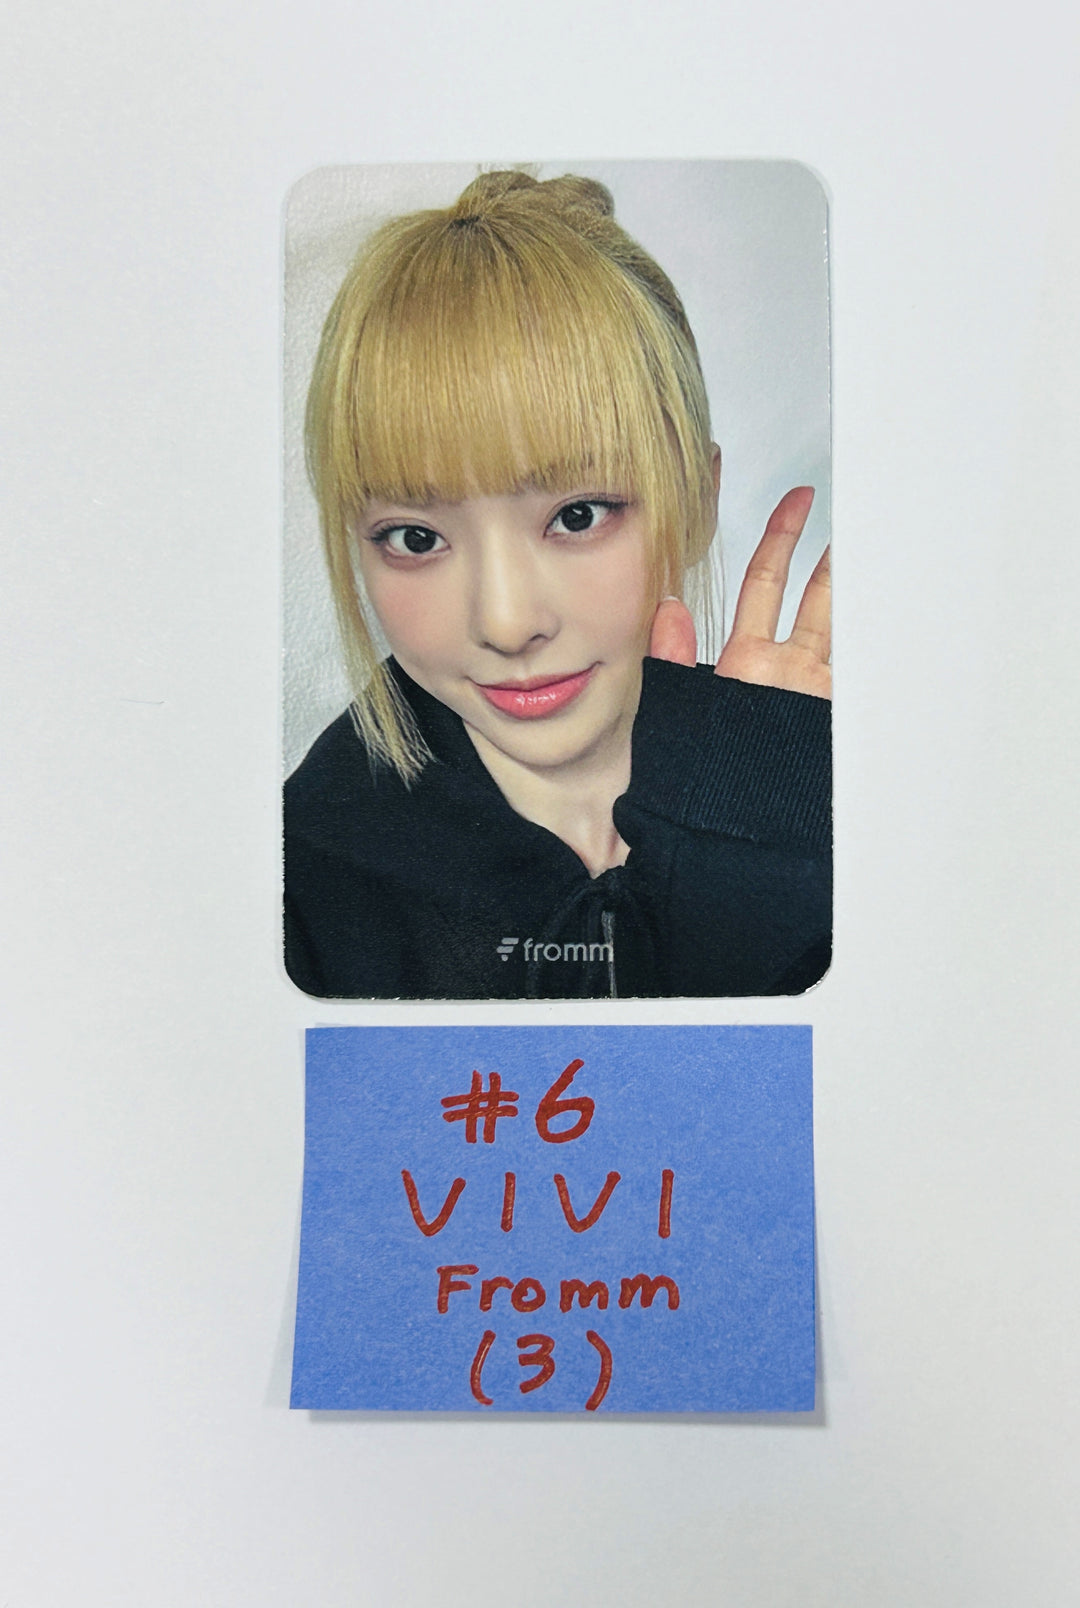 Loossemble "One of a Kind" - Fromm Store Fansign Event Photocard [24. 05. 03]